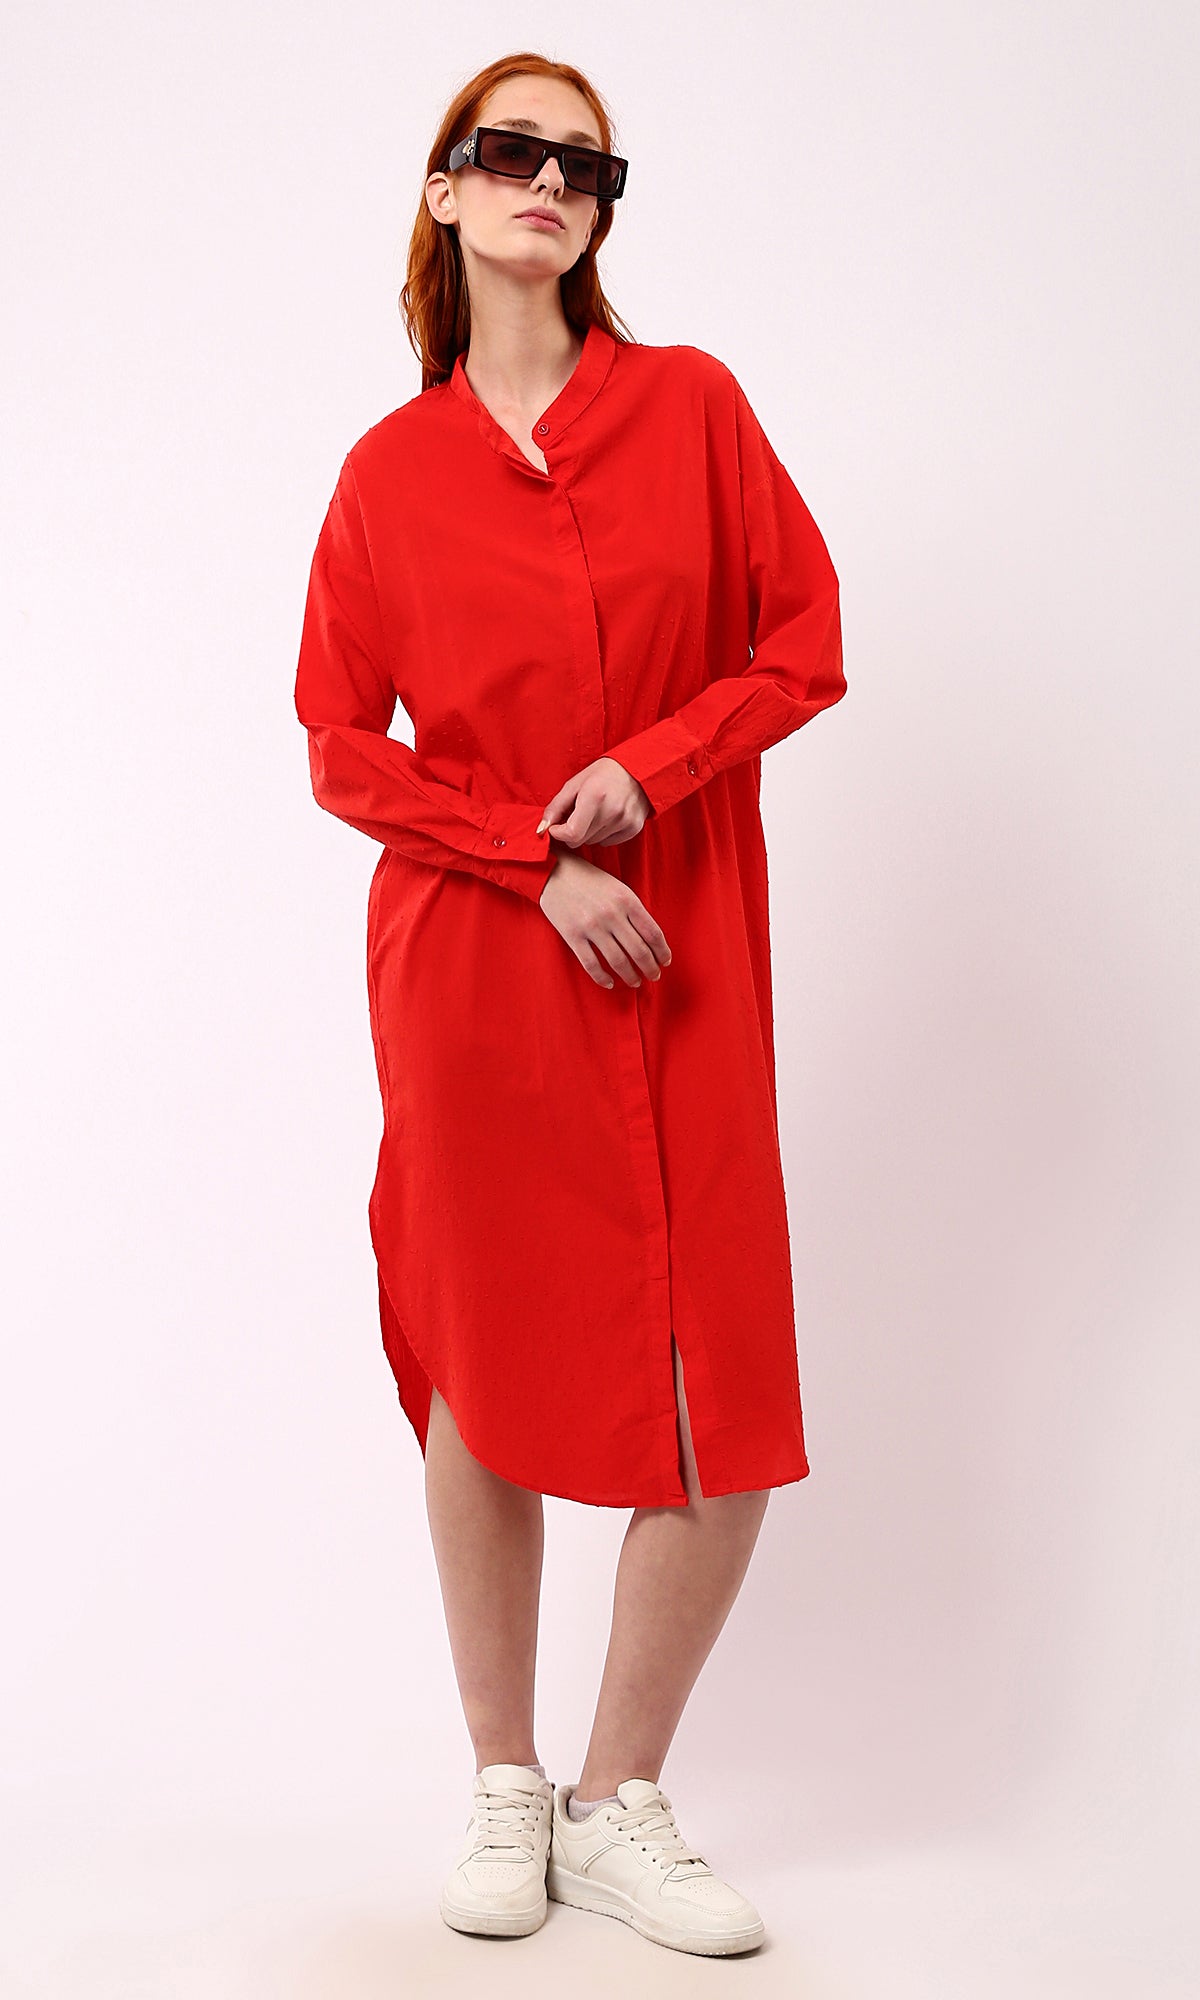 O178035 Long Sleeves Red Patterned Shirt Dress